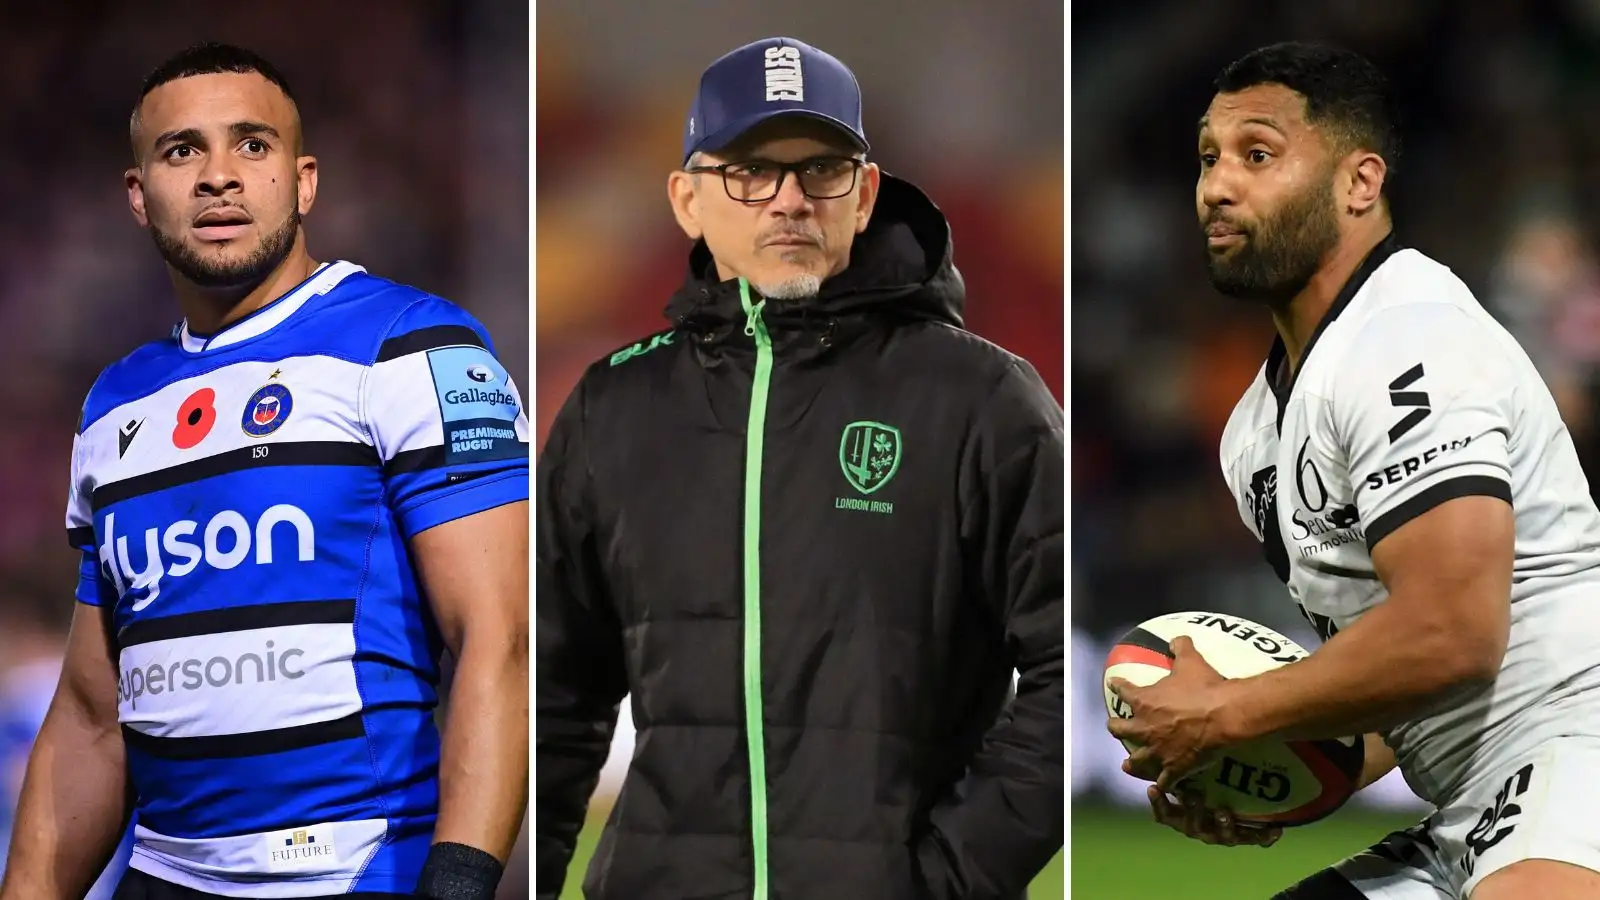 Rugby rumours and transfers: Jonathan Joseph, Les Kiss, Lima Sopoaga and much more